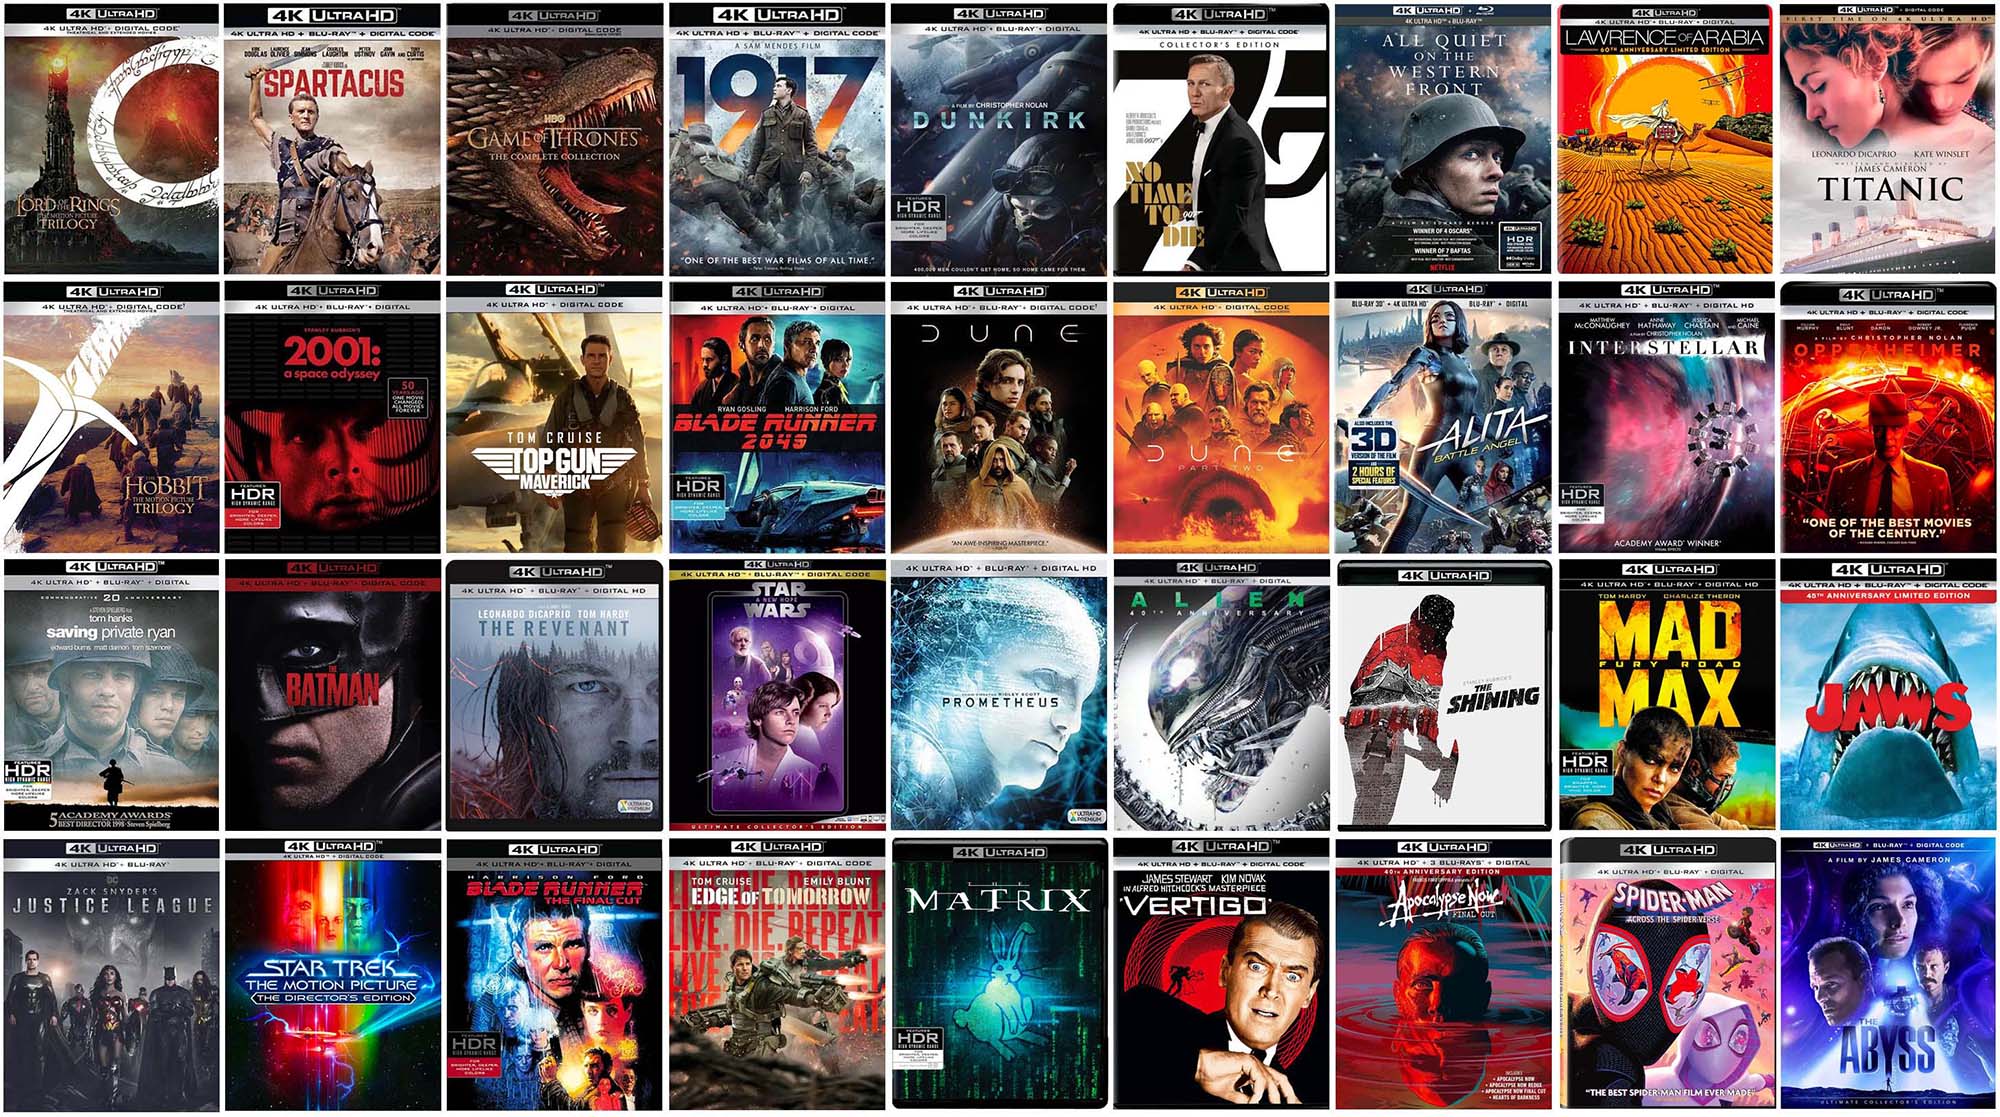 The Best 4k Blu-ray Discs Of All Time